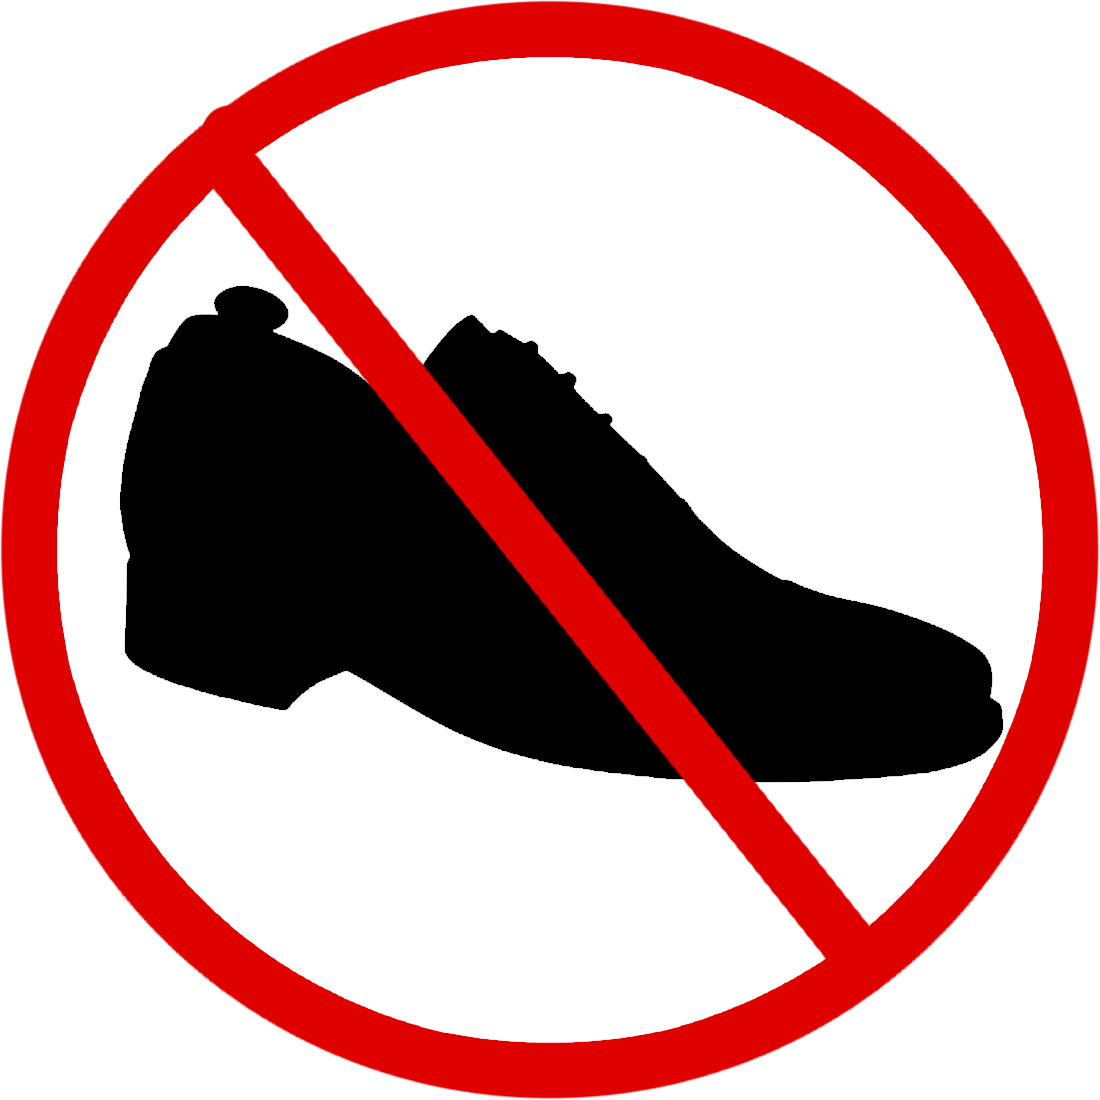 Shoes Allowed Clipart - Shoes Off, Transparent background PNG HD thumbnail